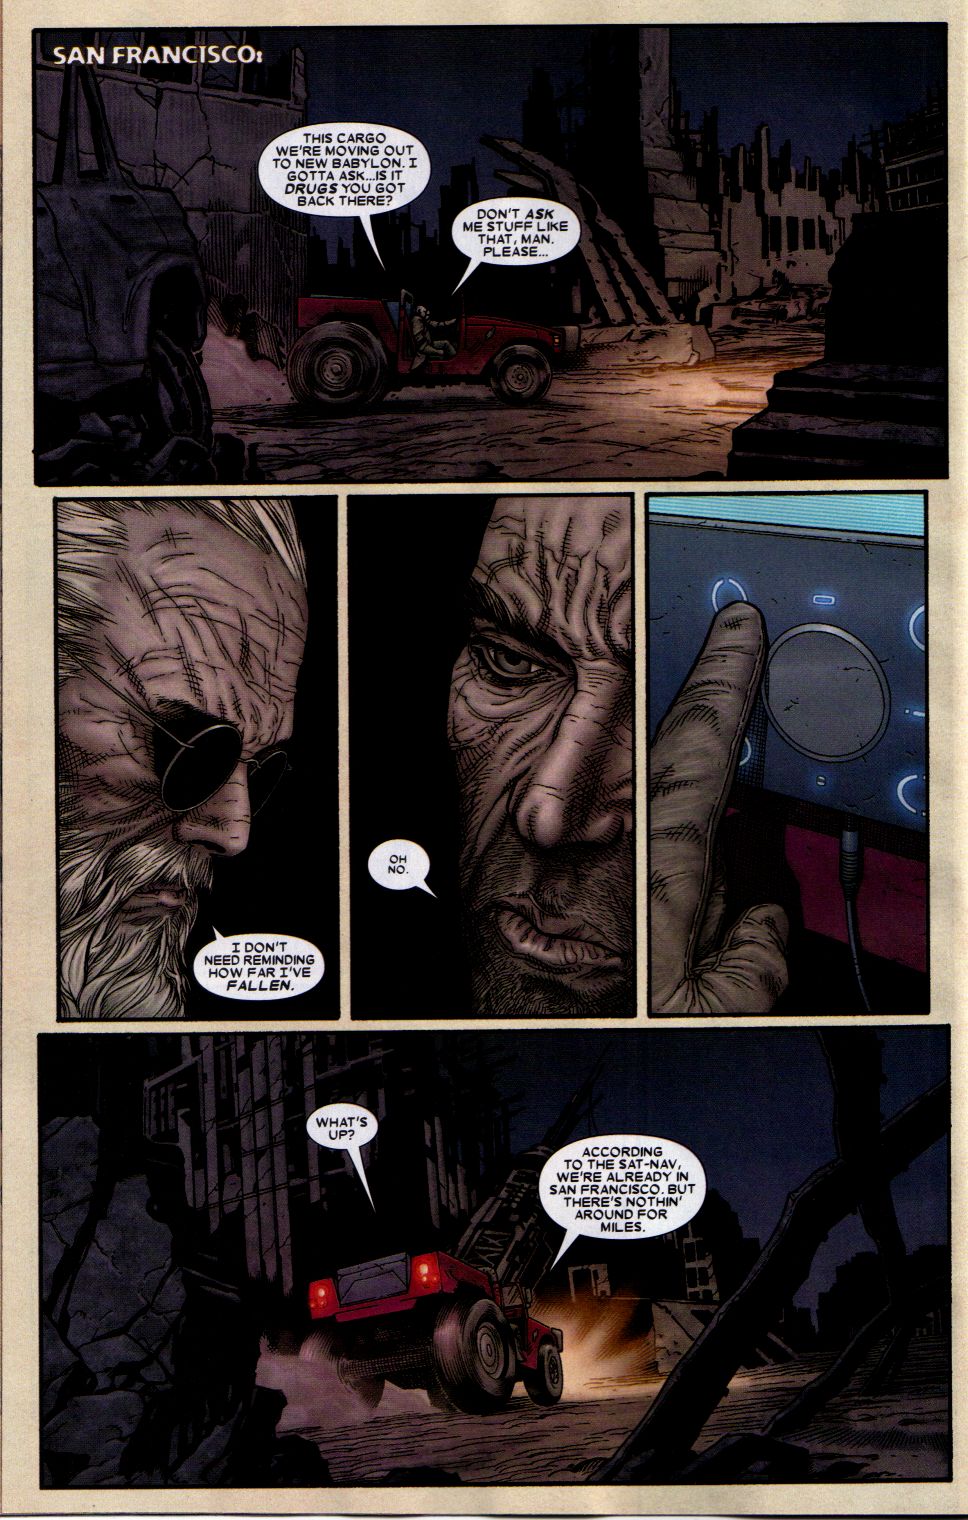 Old Man Logan - San Francisco This Cargo We'Re Moving Out To New Babylon. I Gotta Ask...Is It Drugs You Got Back There? Don'T Ask Me Stuff That, Man Please... I Don'T Need Reminding How Far I'Ve Fallen. What'S Up? According To The SatNav, We'Re Already In